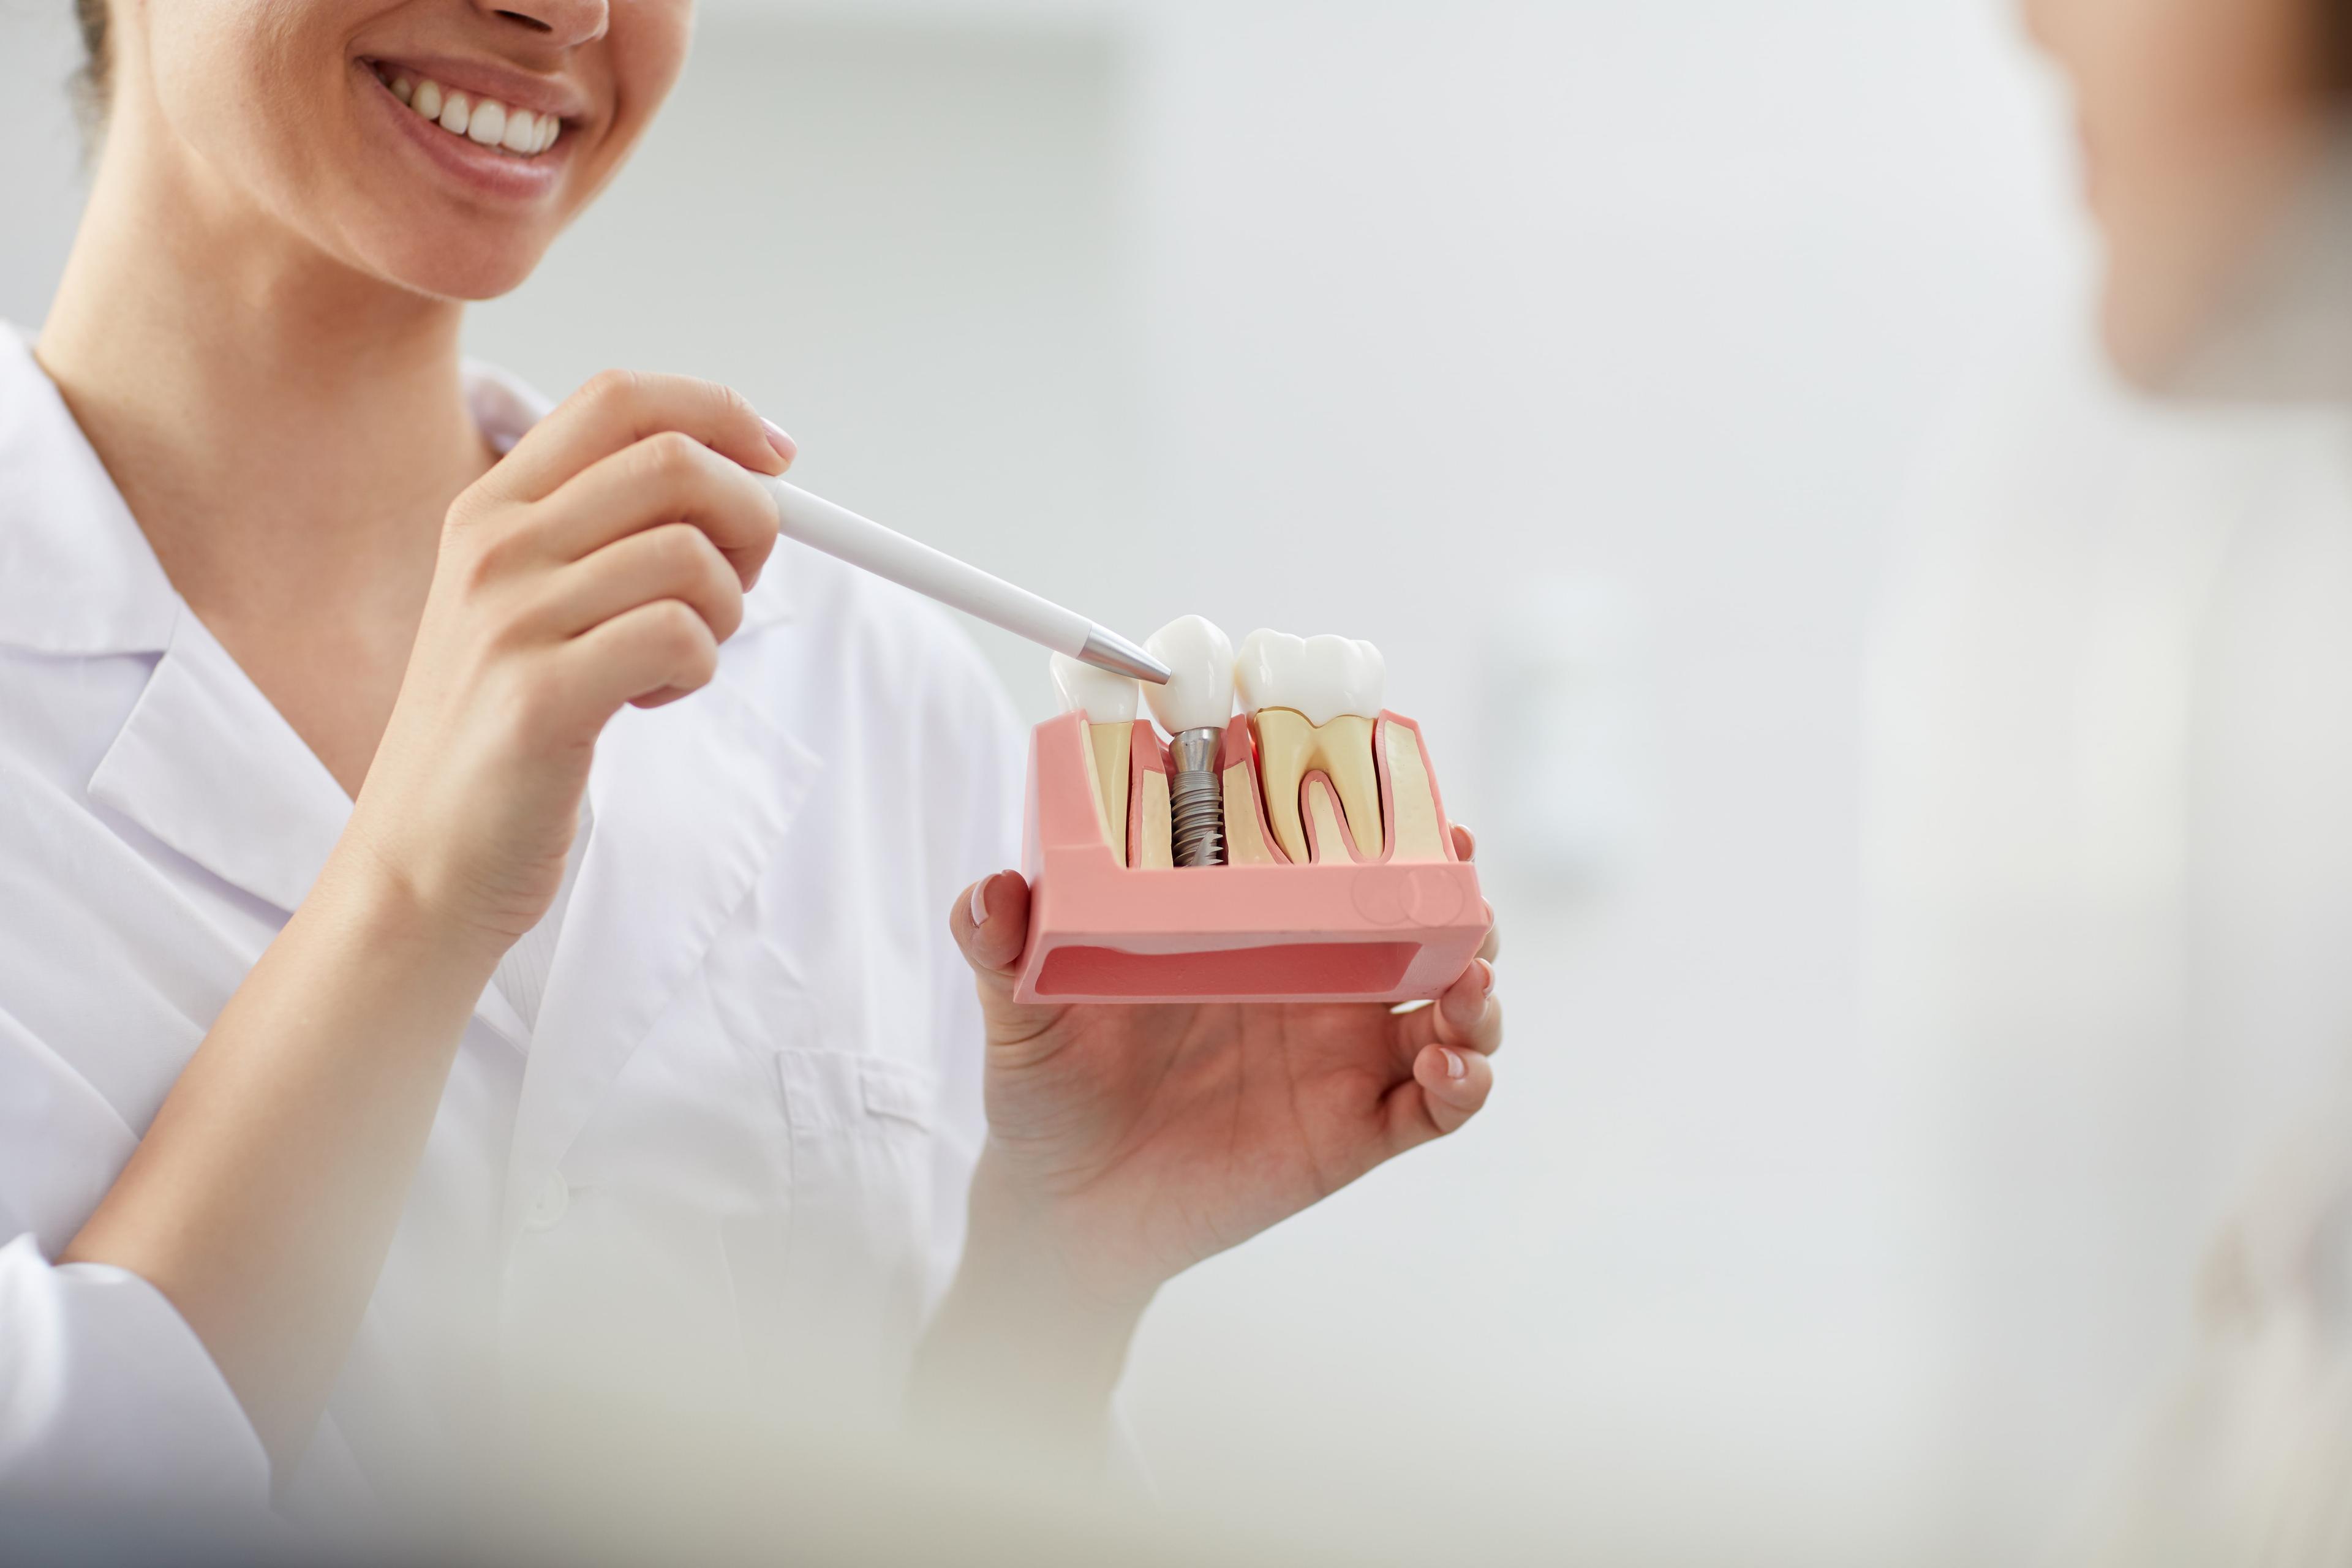 Dental Implants: Problems, Types, and Benefits